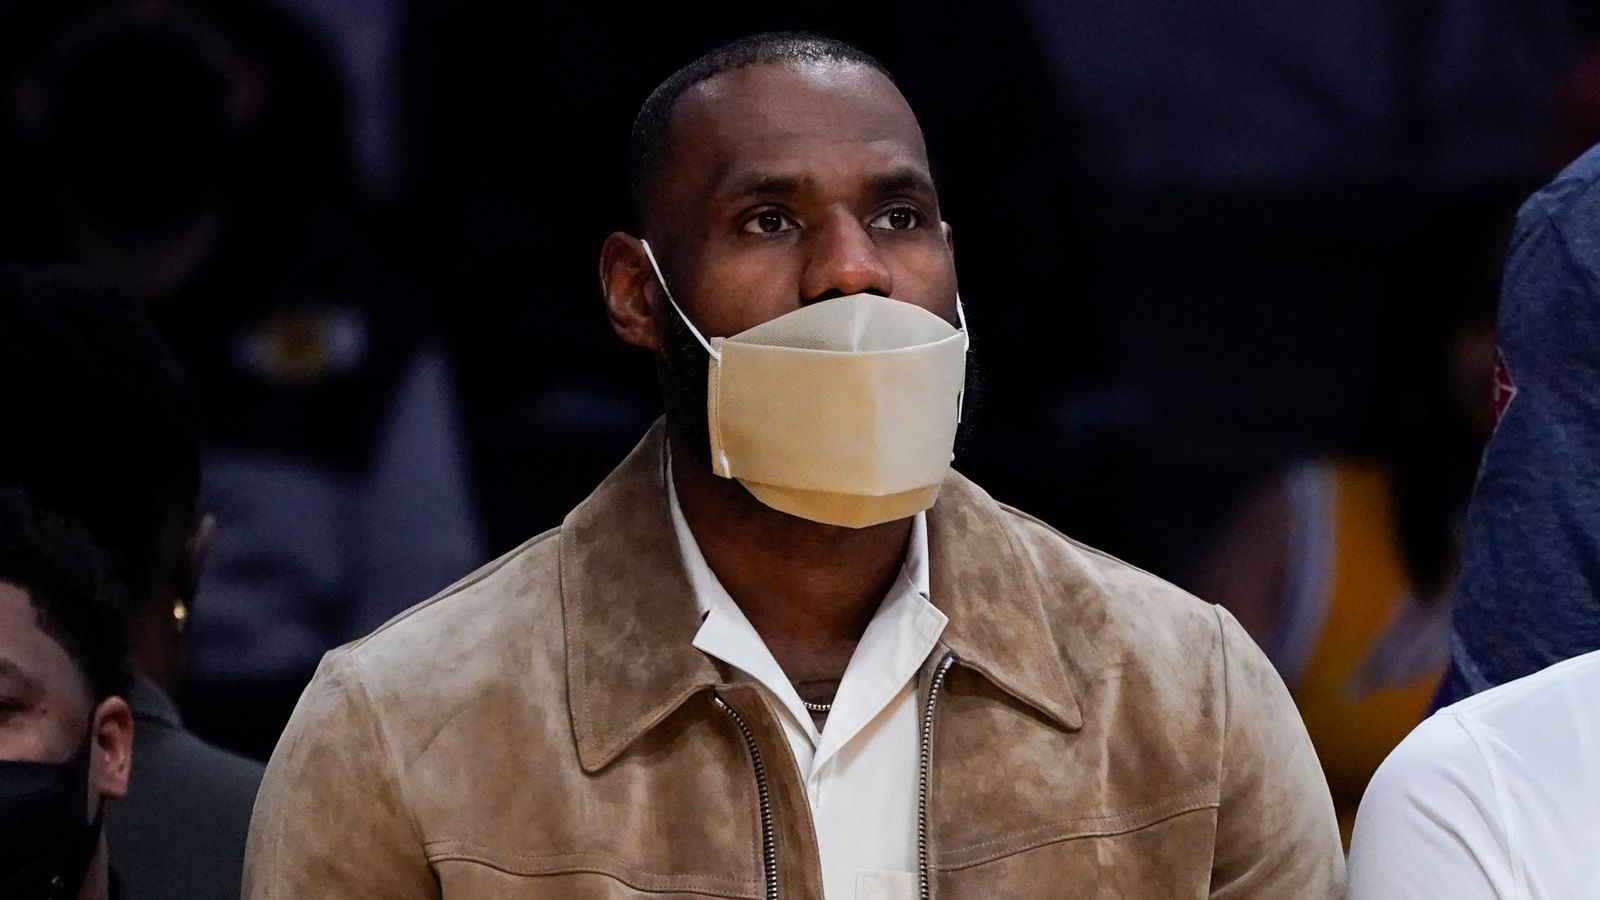 LeBron James sidelined by NBA COVID-19 protocols as superstar ‘expected’ to miss several games